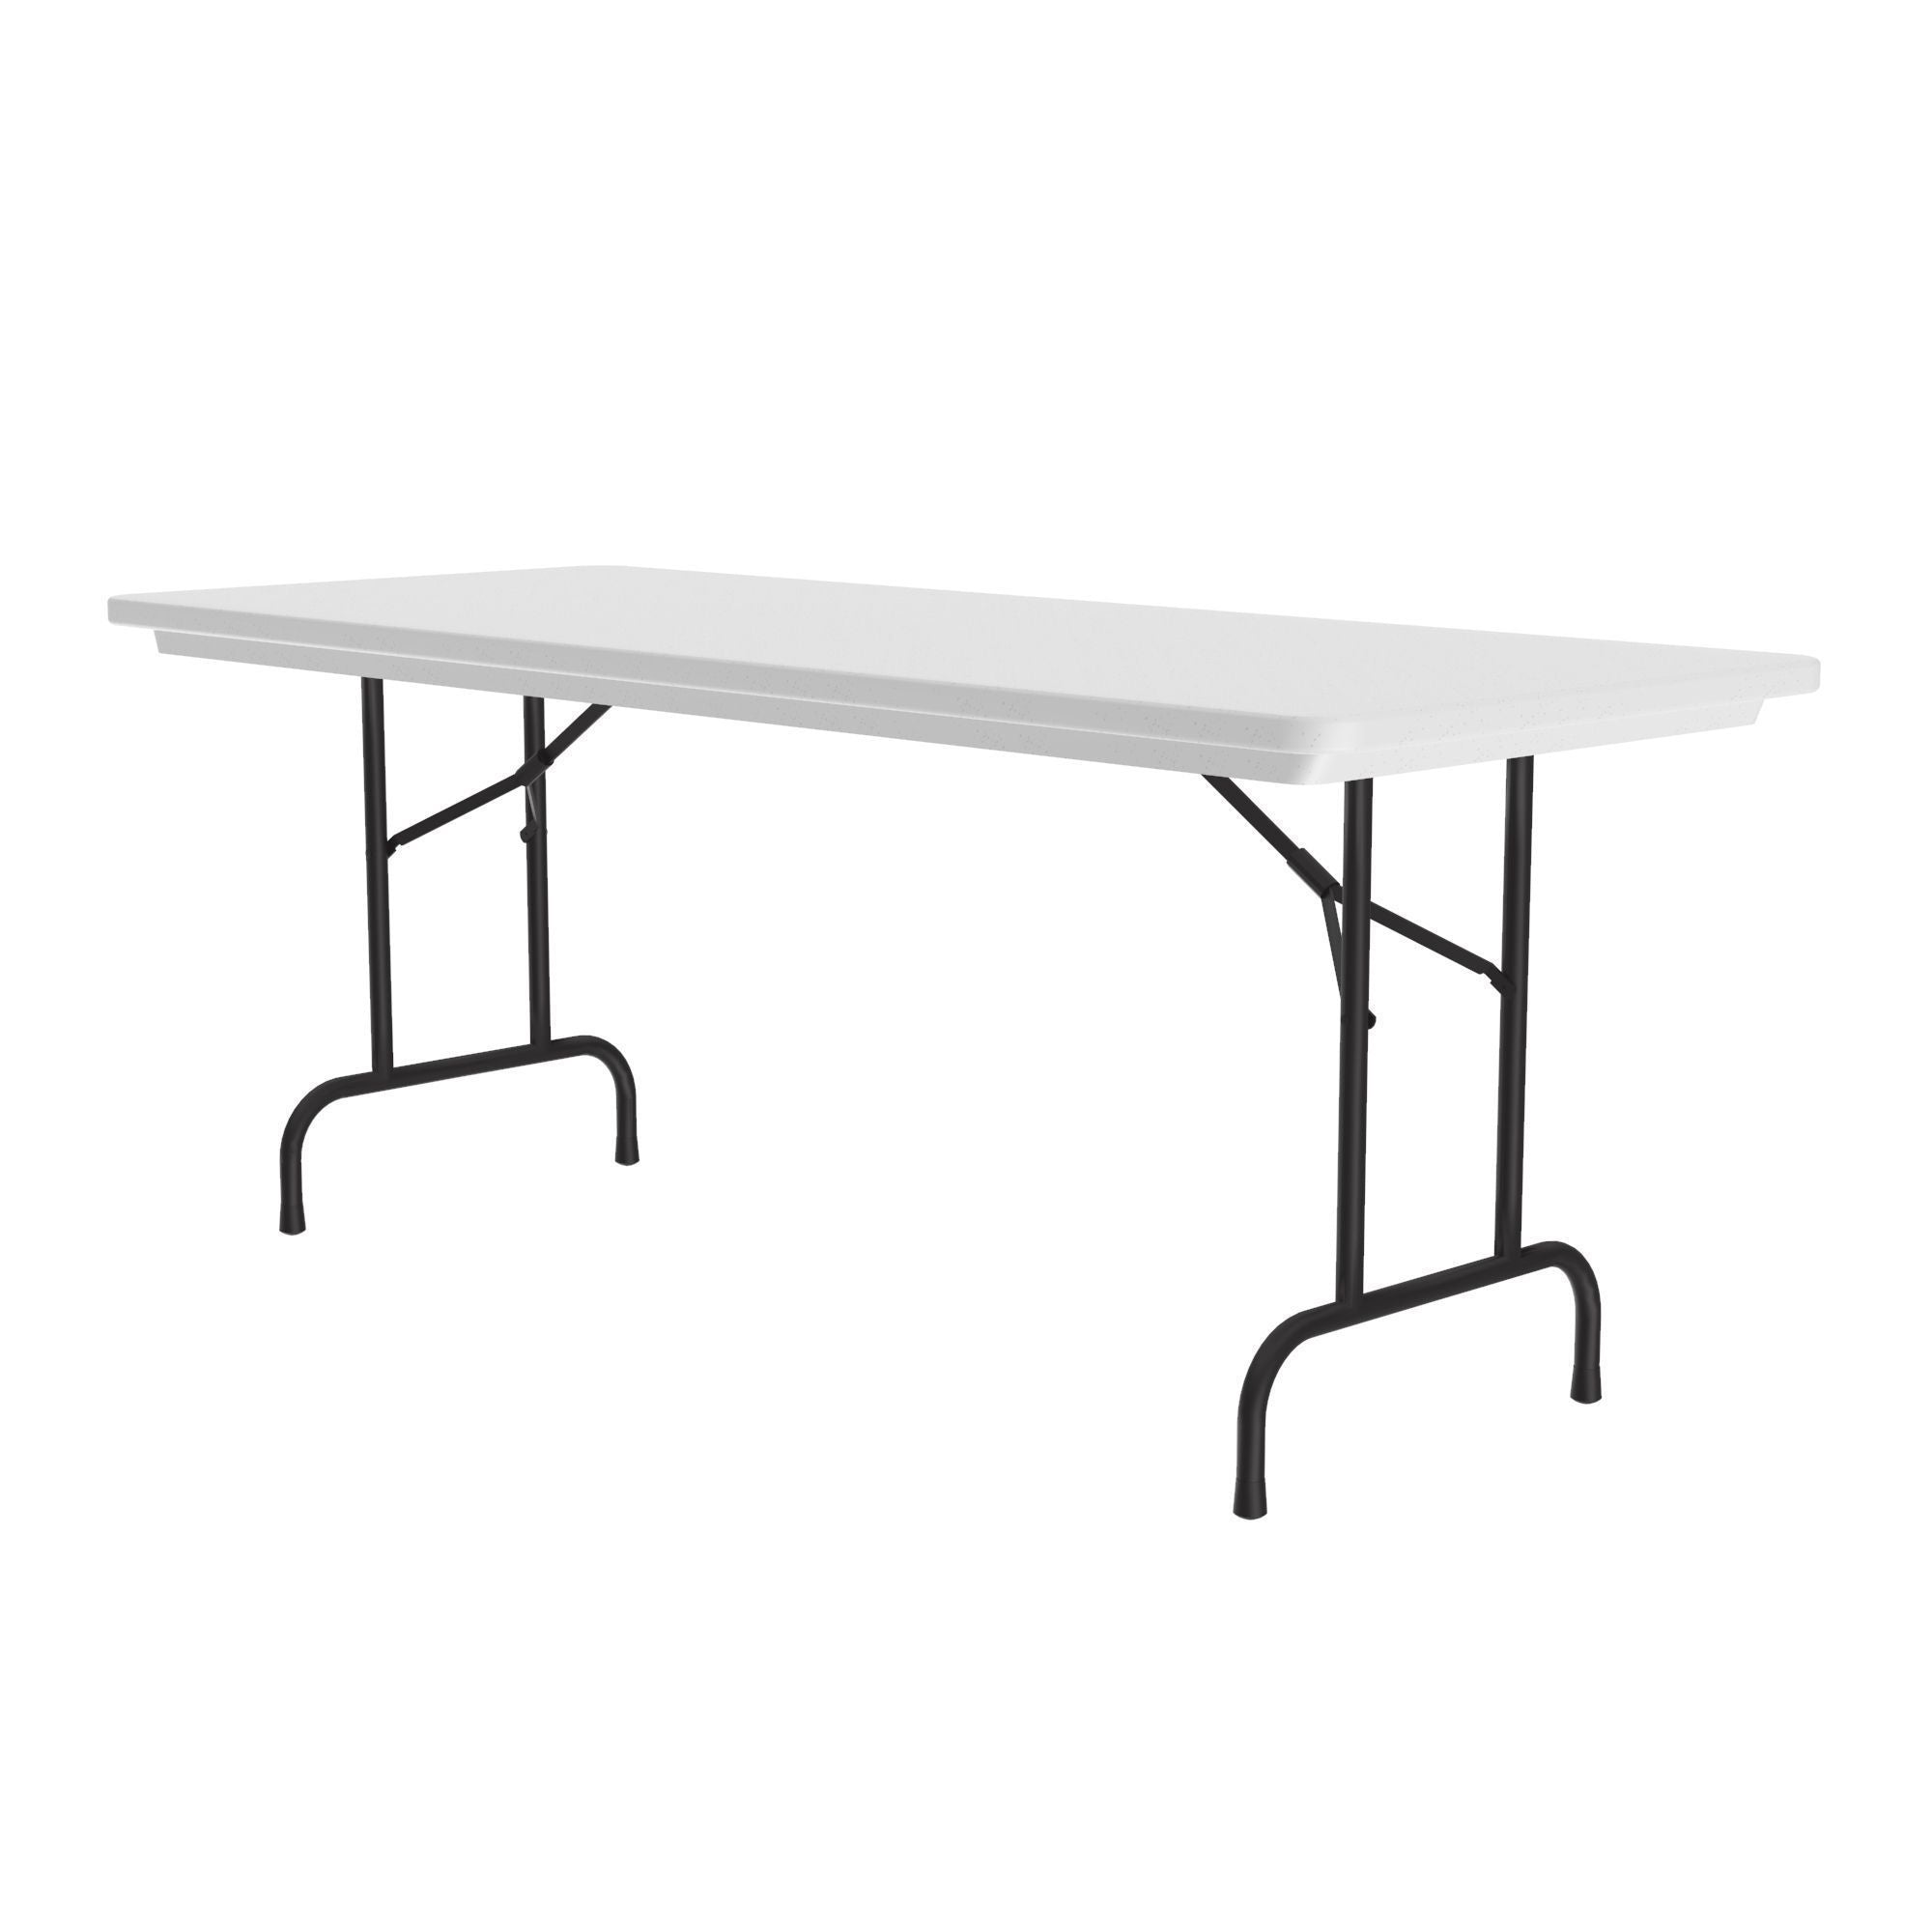 Heavy Duty Commercial Use Blow Molded Folding Table, Standard Colors, Standard 29" Fixed Height, 30 x 60